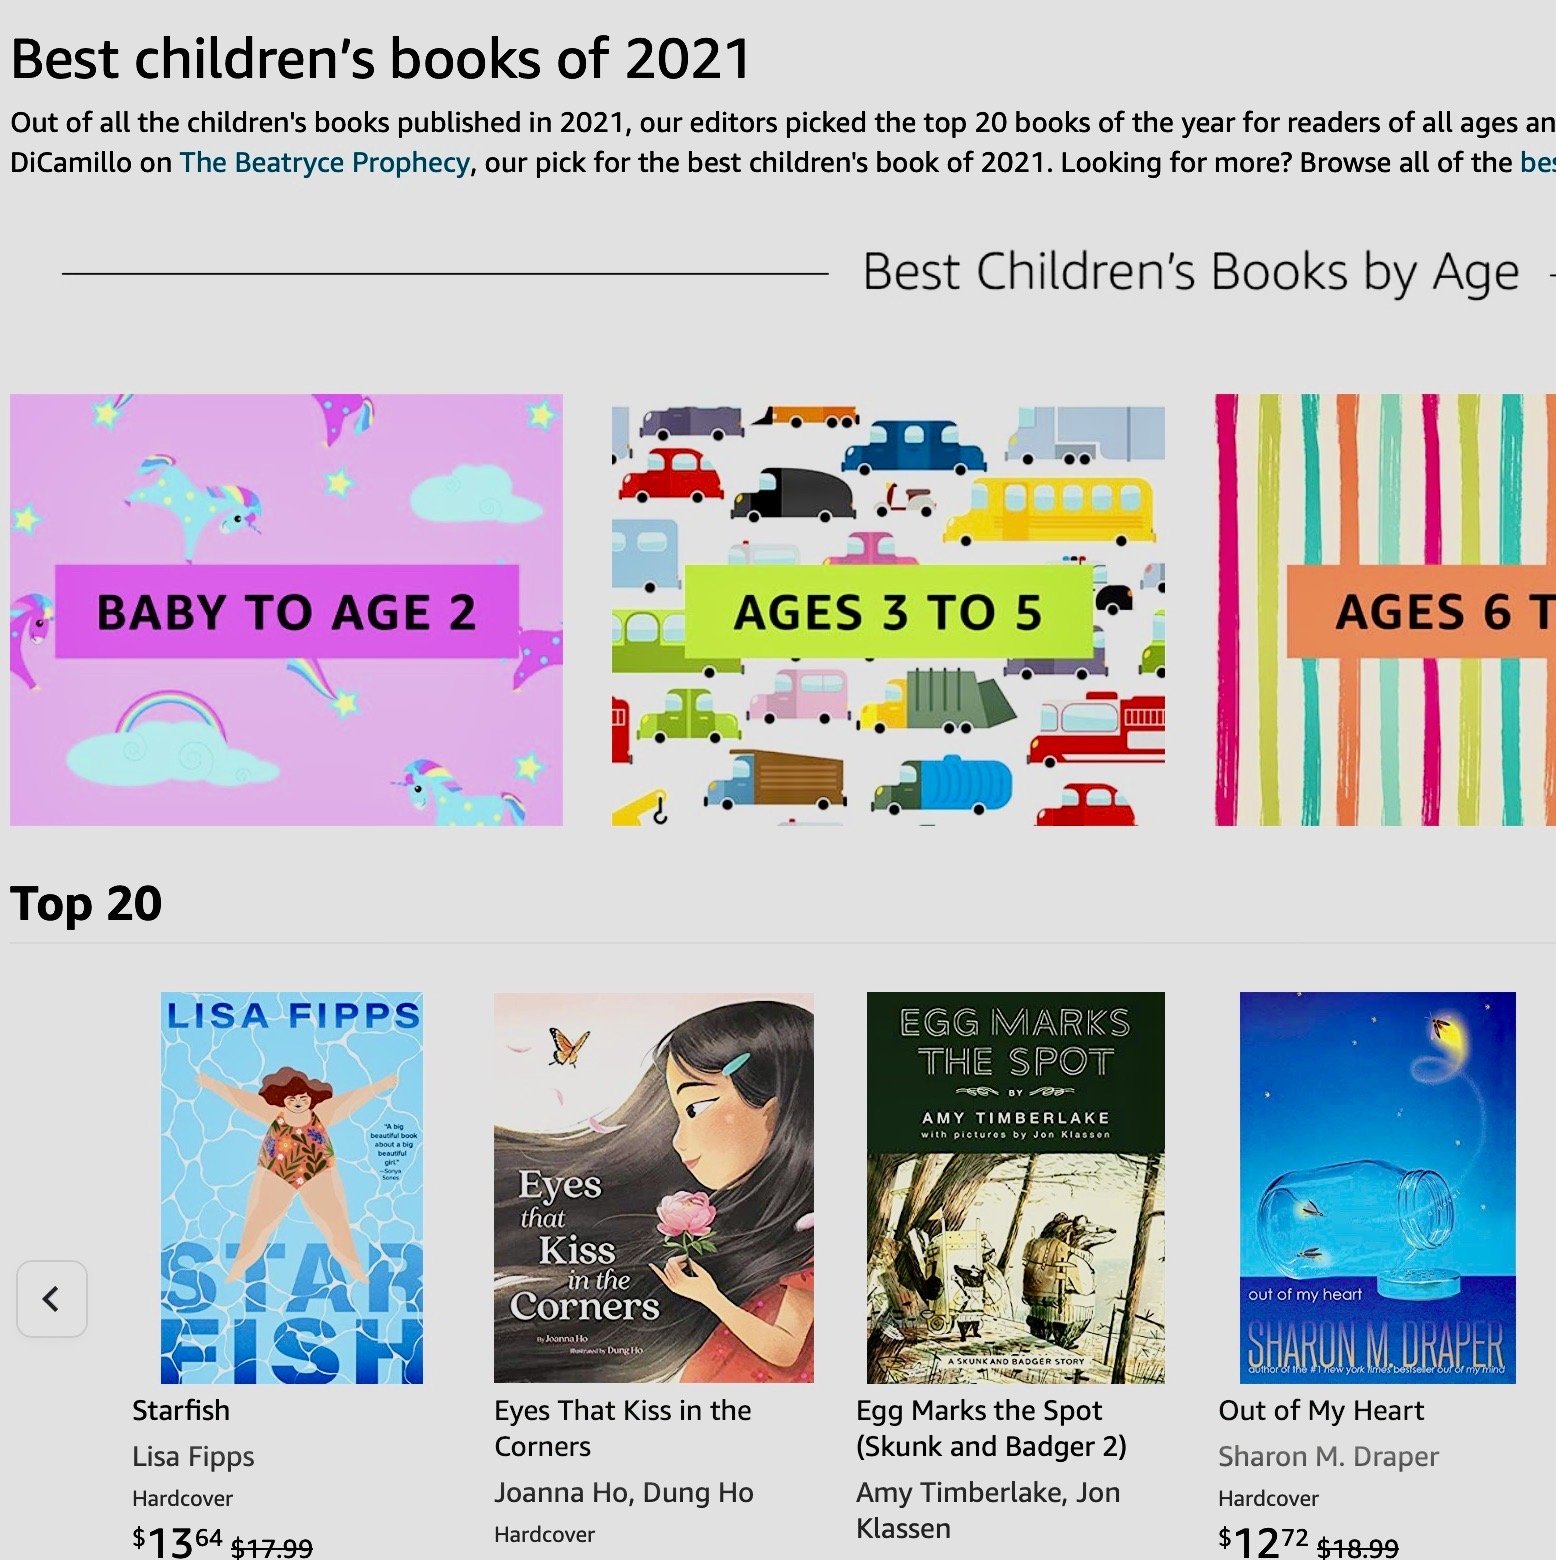 11/16/21 Amazon named EGG MARKS THE SPOT a top 20 kids book of 2021!